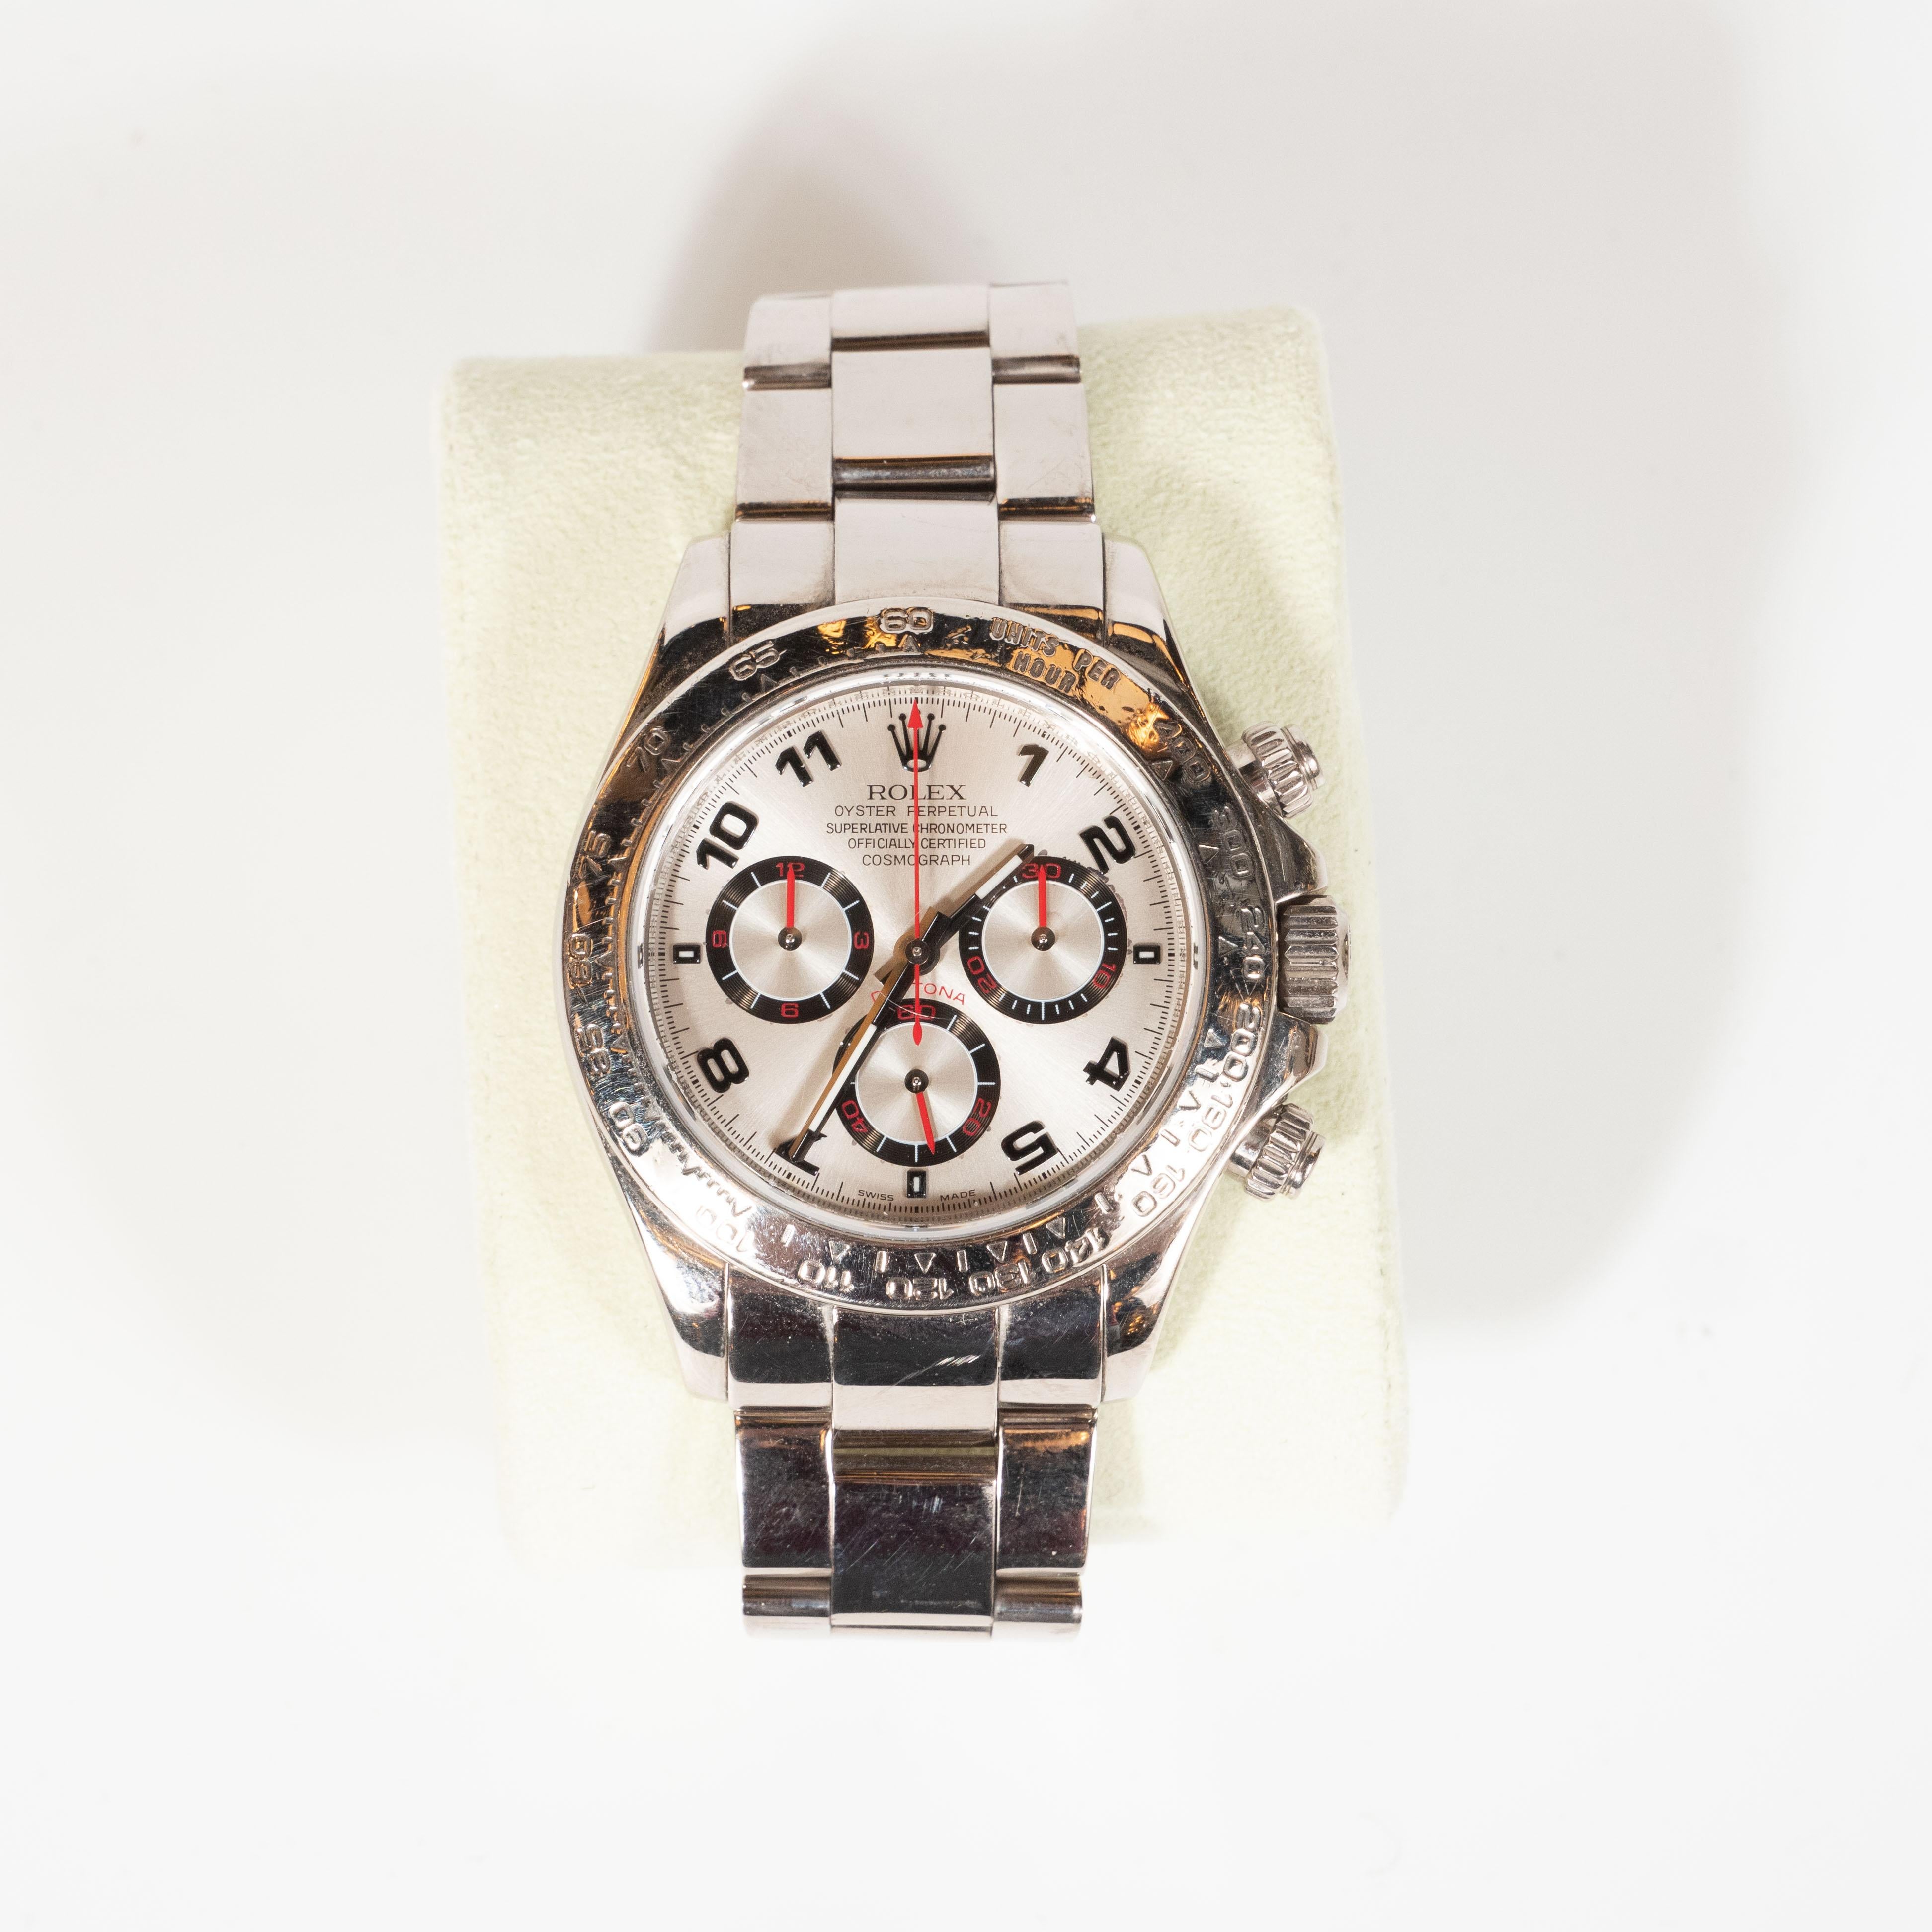 Rolex White Gold Cosmograph Daytona Wristwatch Ref 116509 with Box & Papers 10